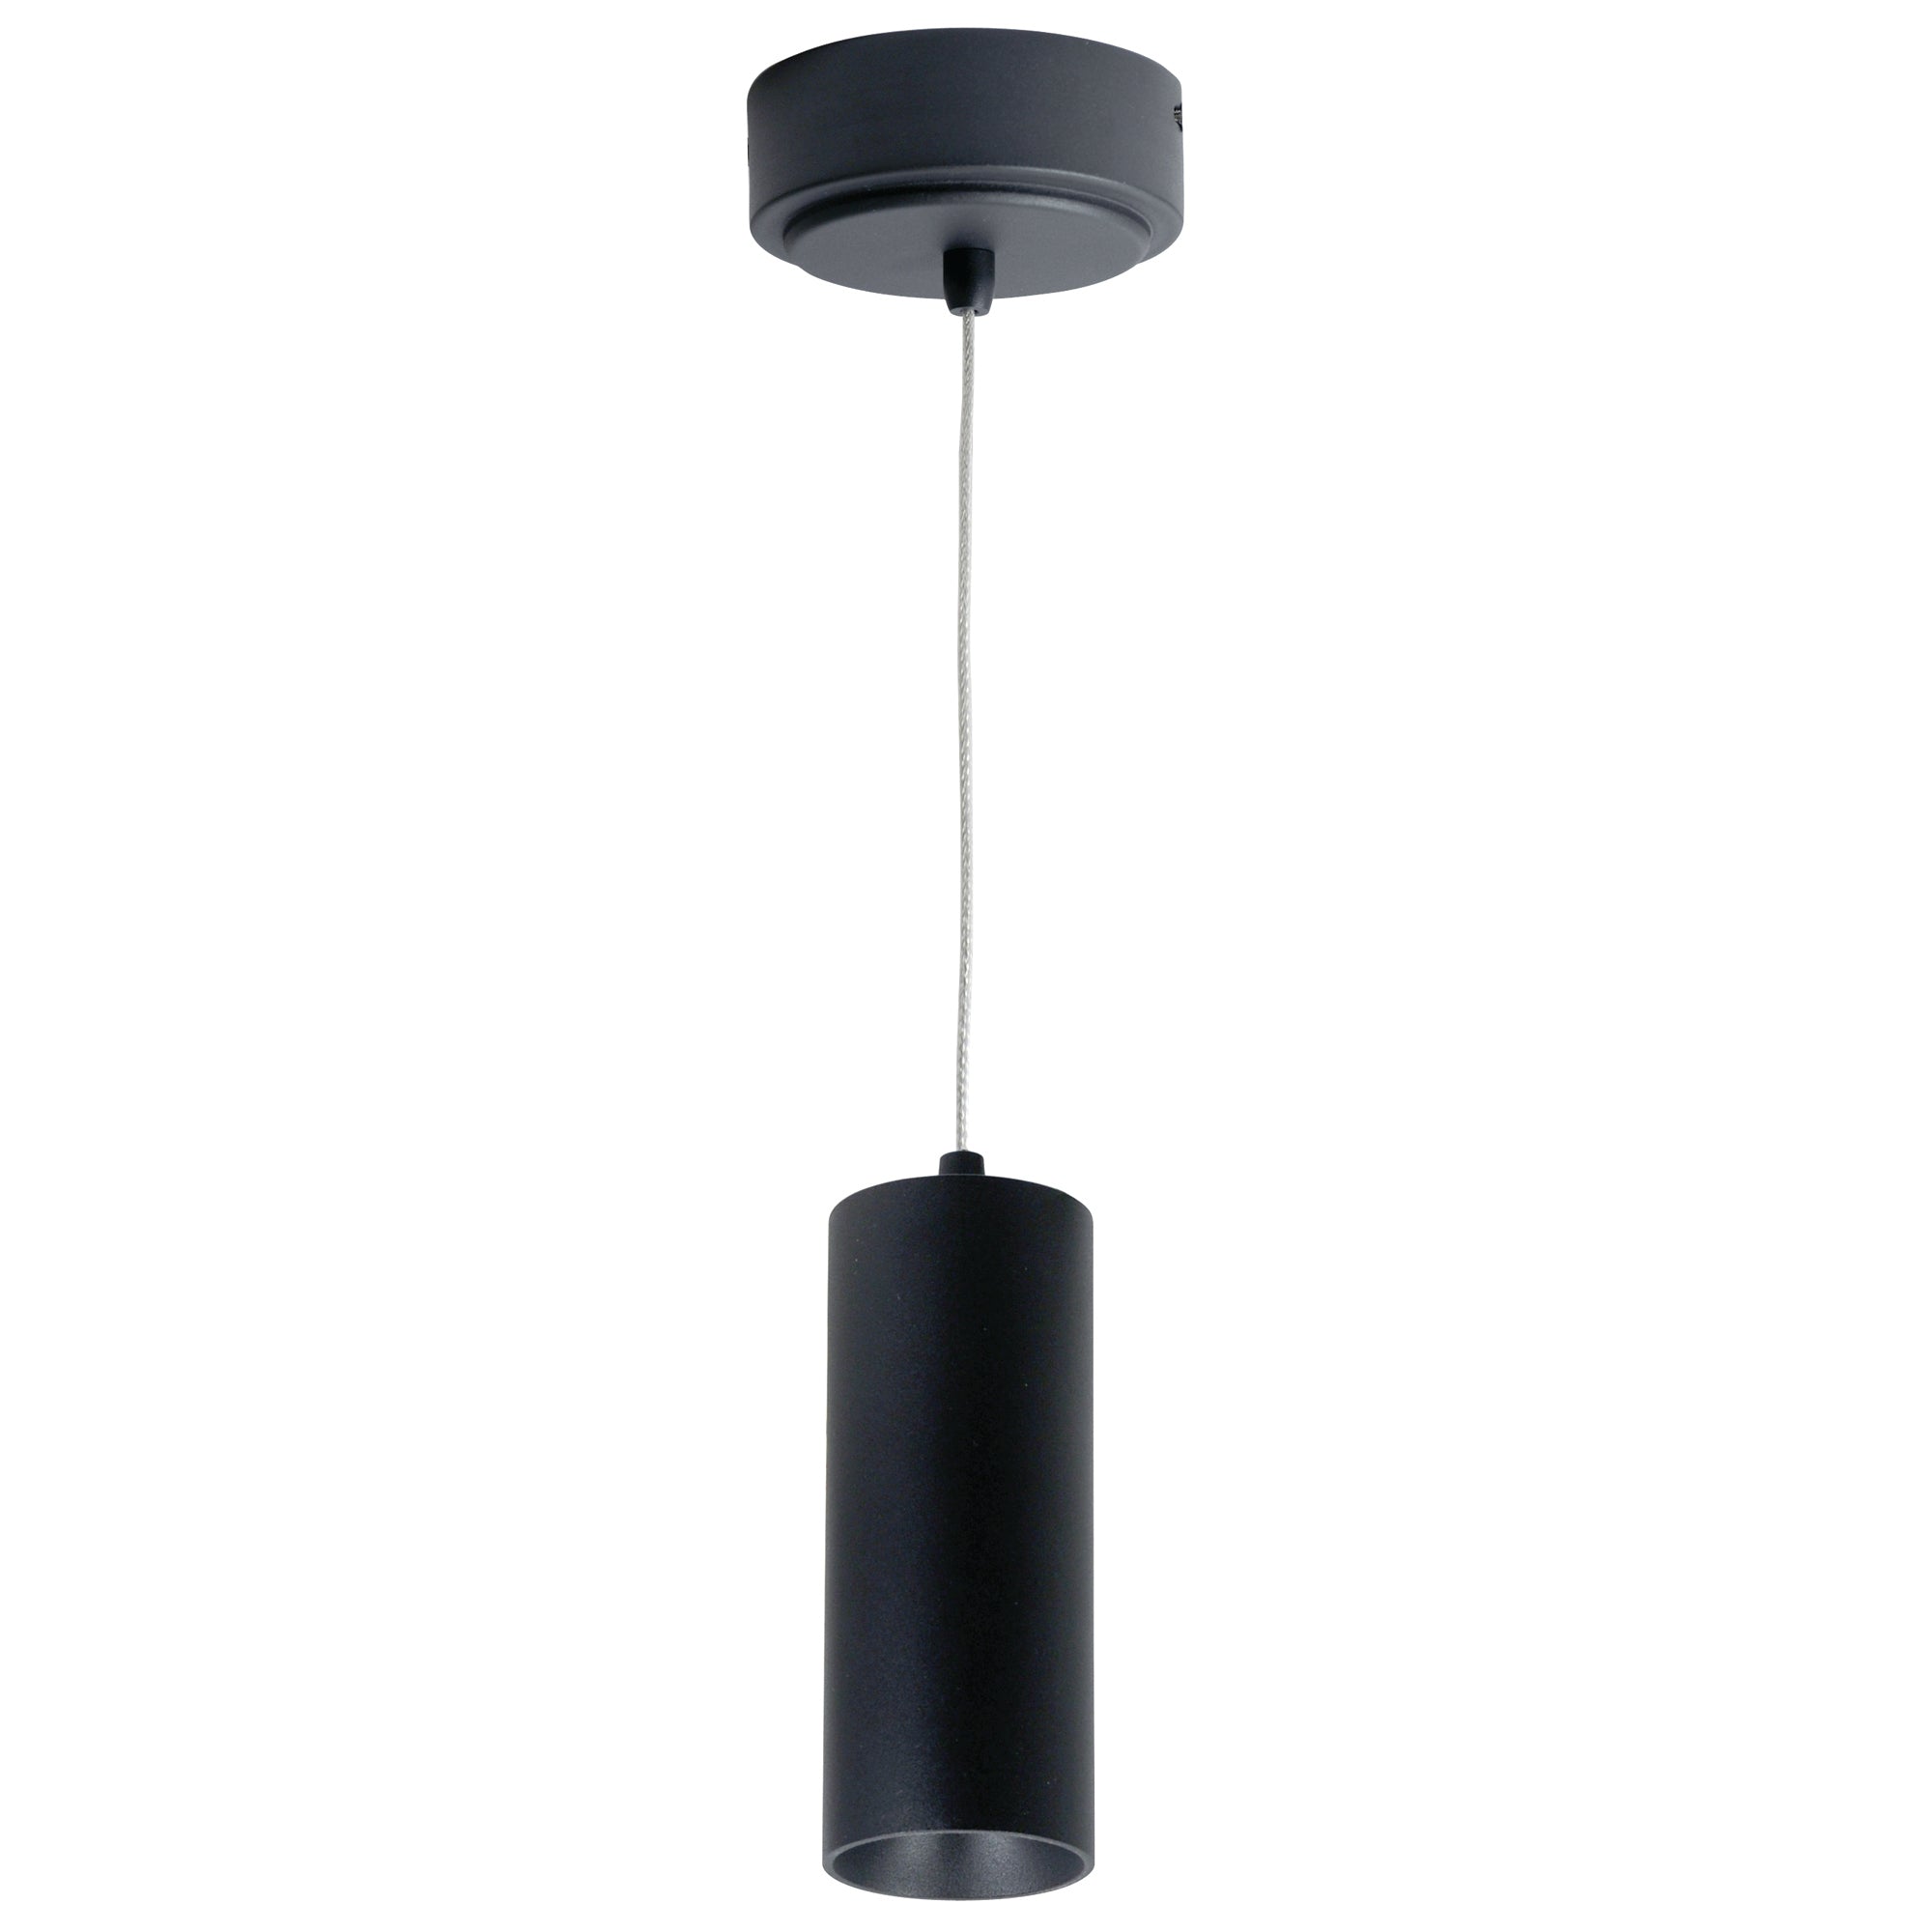 Nora Lighting LE56 - NYLM-2C30XBBLE3A - Cylinder - Black